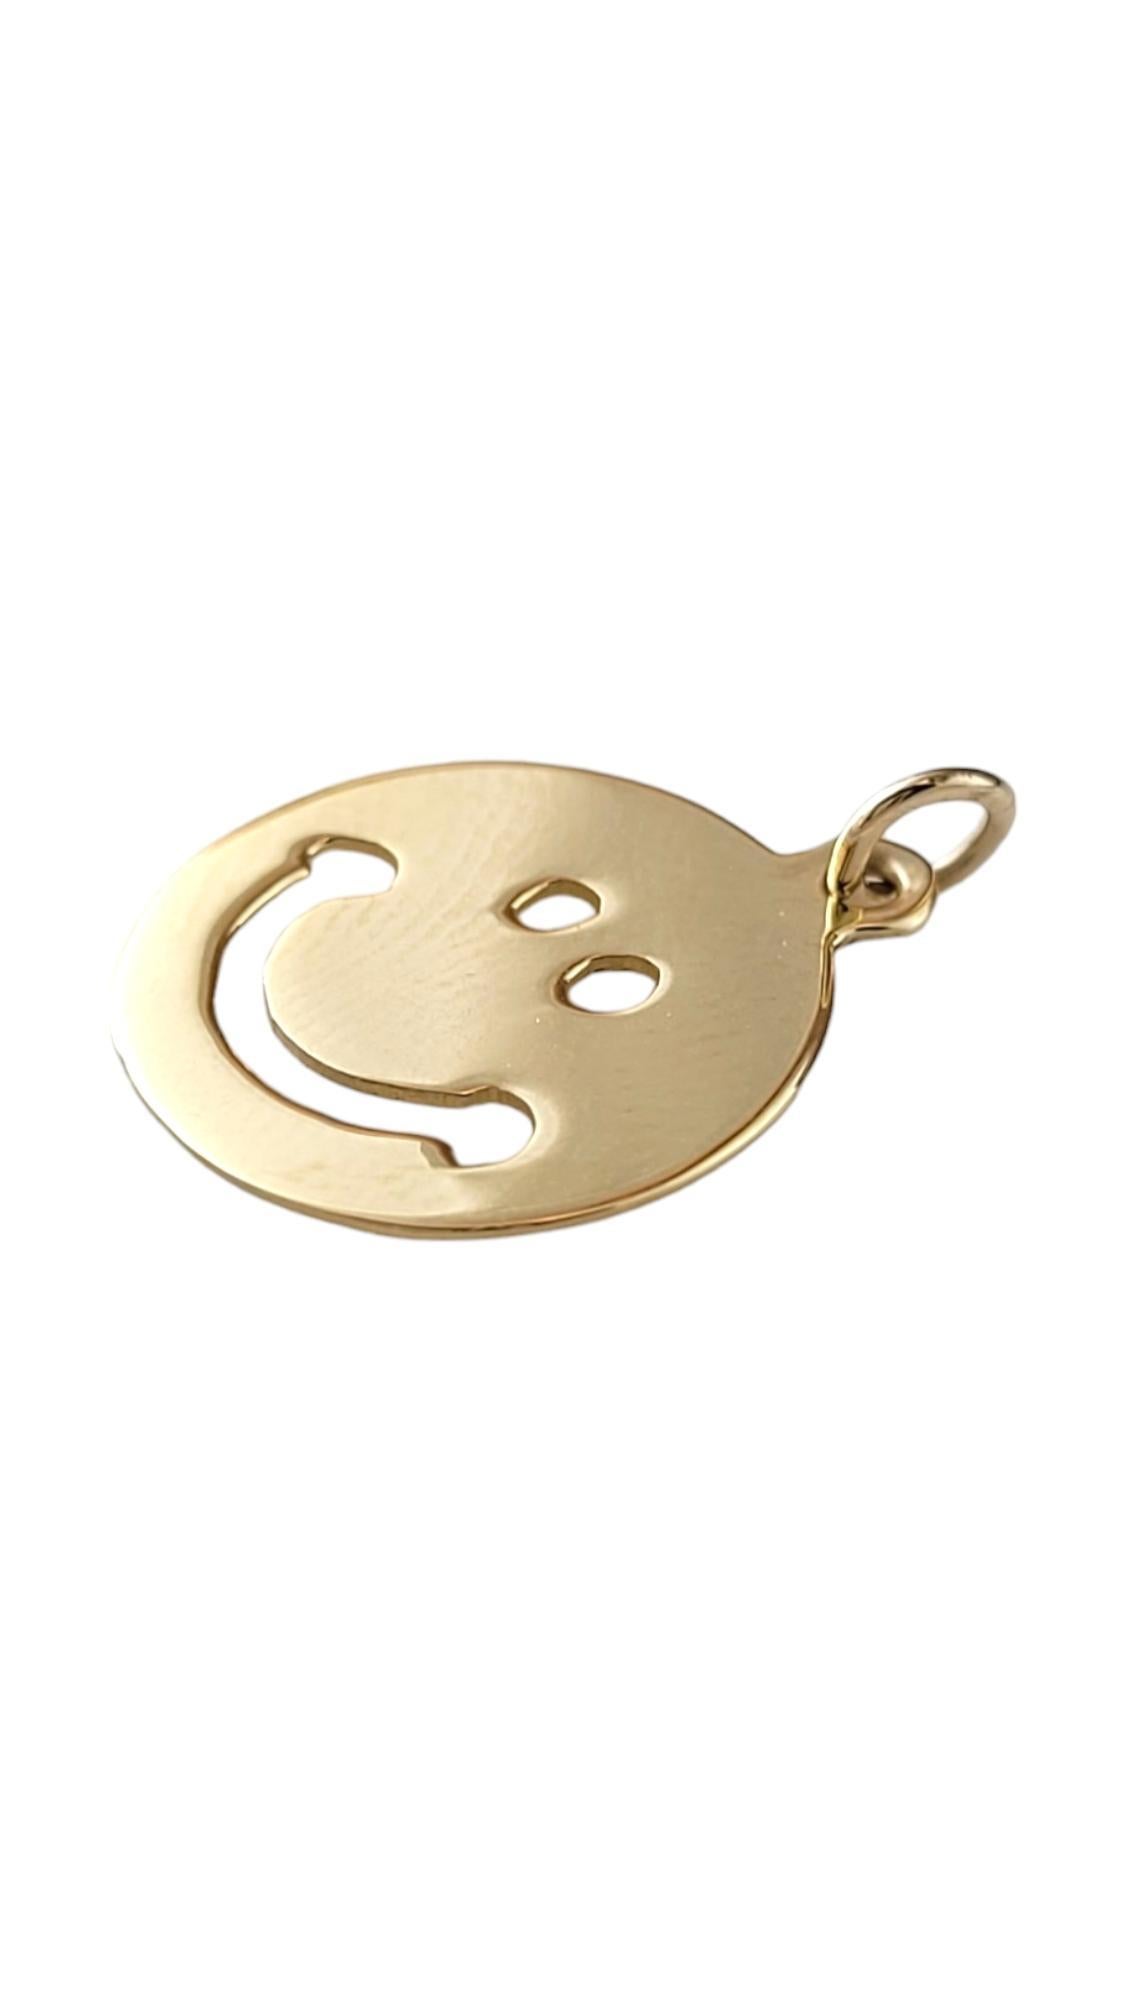 Vintage 14K Yellow Gold Smiley Face Charm #16881

This adorable smiley face charm is crafted from 14K yellow gold and is sure to bring some smiles to your life!

Size: 17.7mm X 14.8mm X 0.7mm

Weight: 0.6 dwt/ 1.0 g

Hallmark: CCC 14

Very good